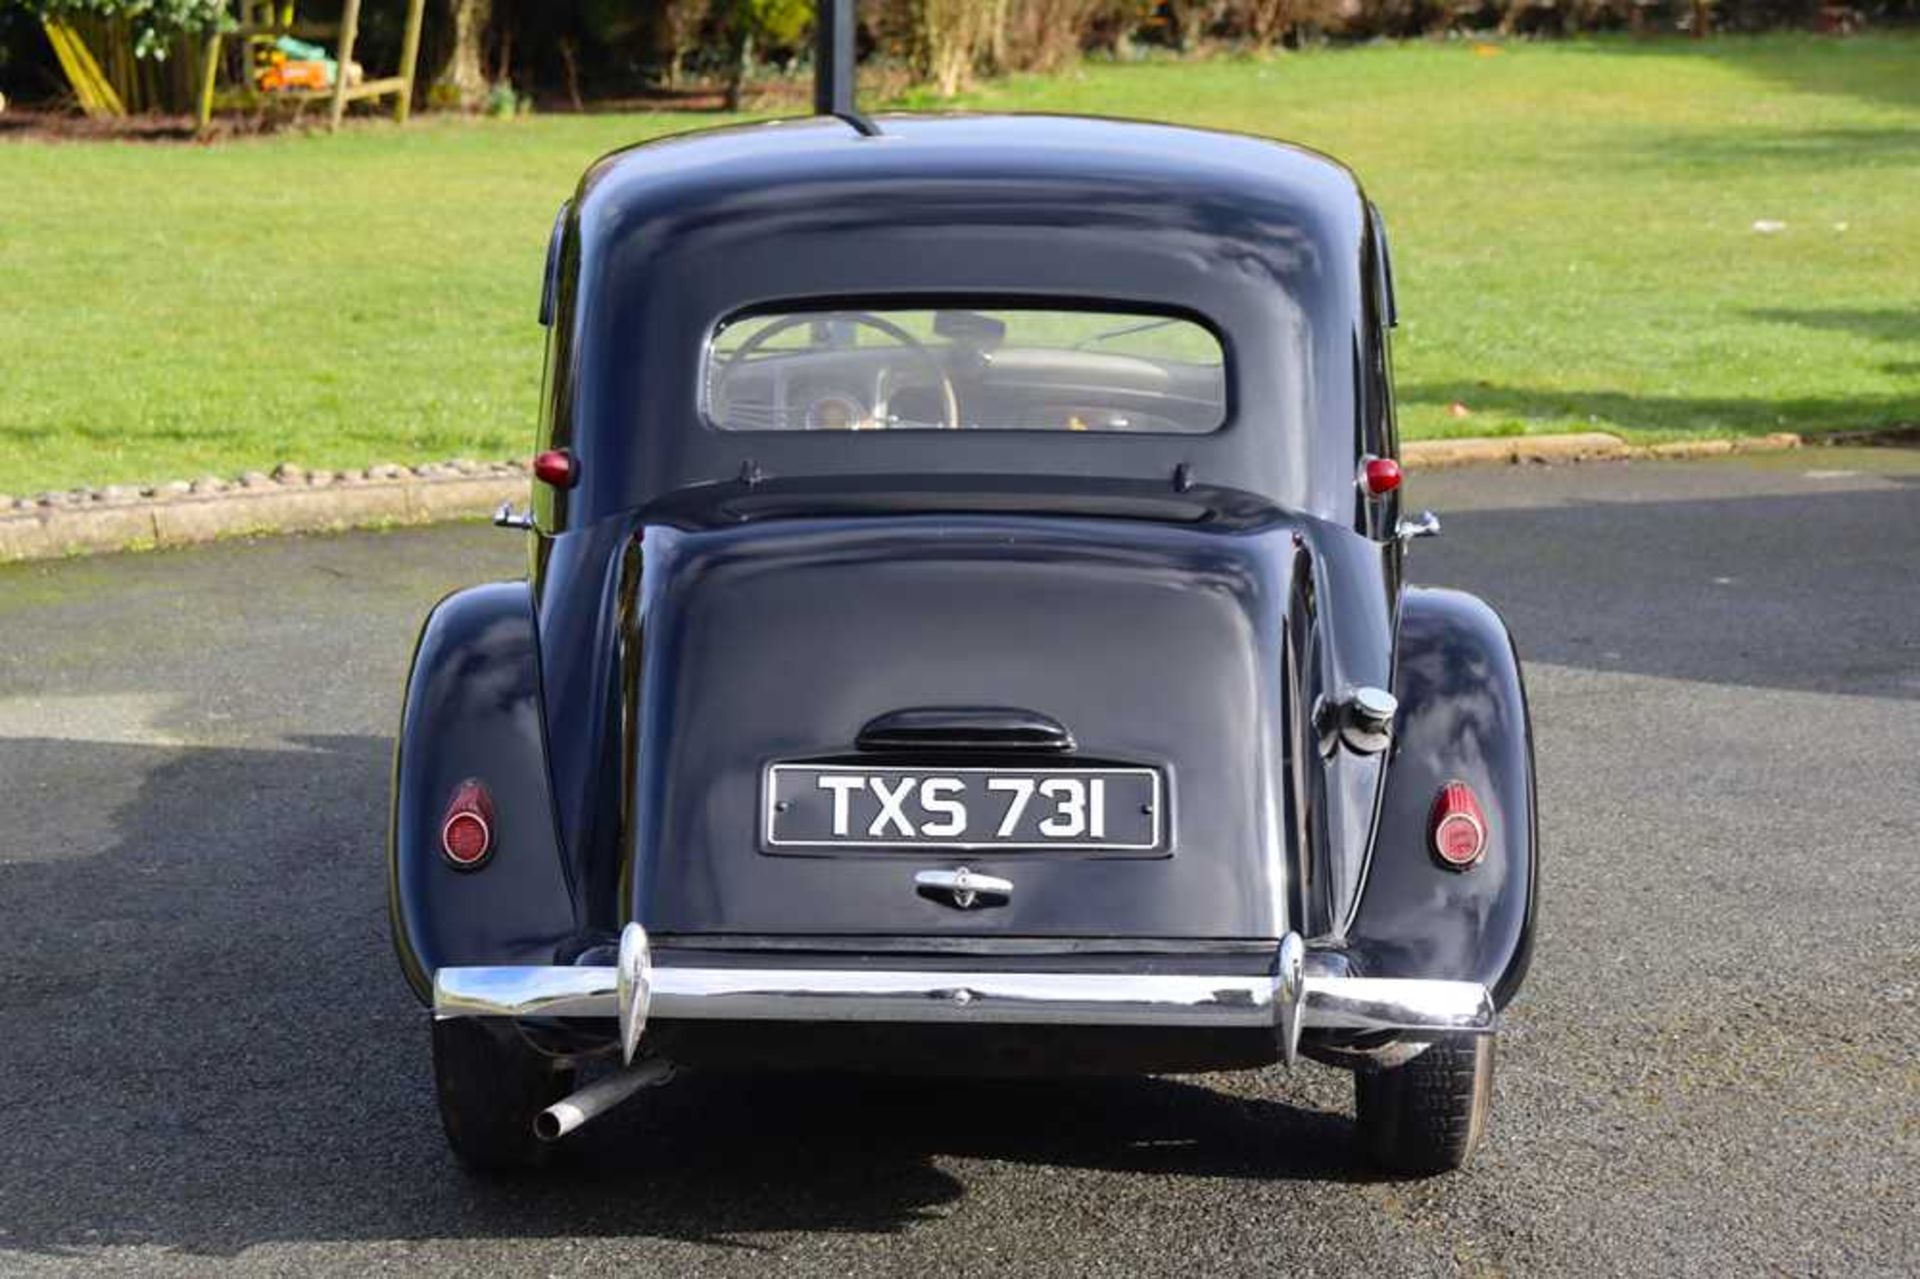 1952 Citroën 11BL Traction Avant In current ownership for over 40 years - Image 14 of 60